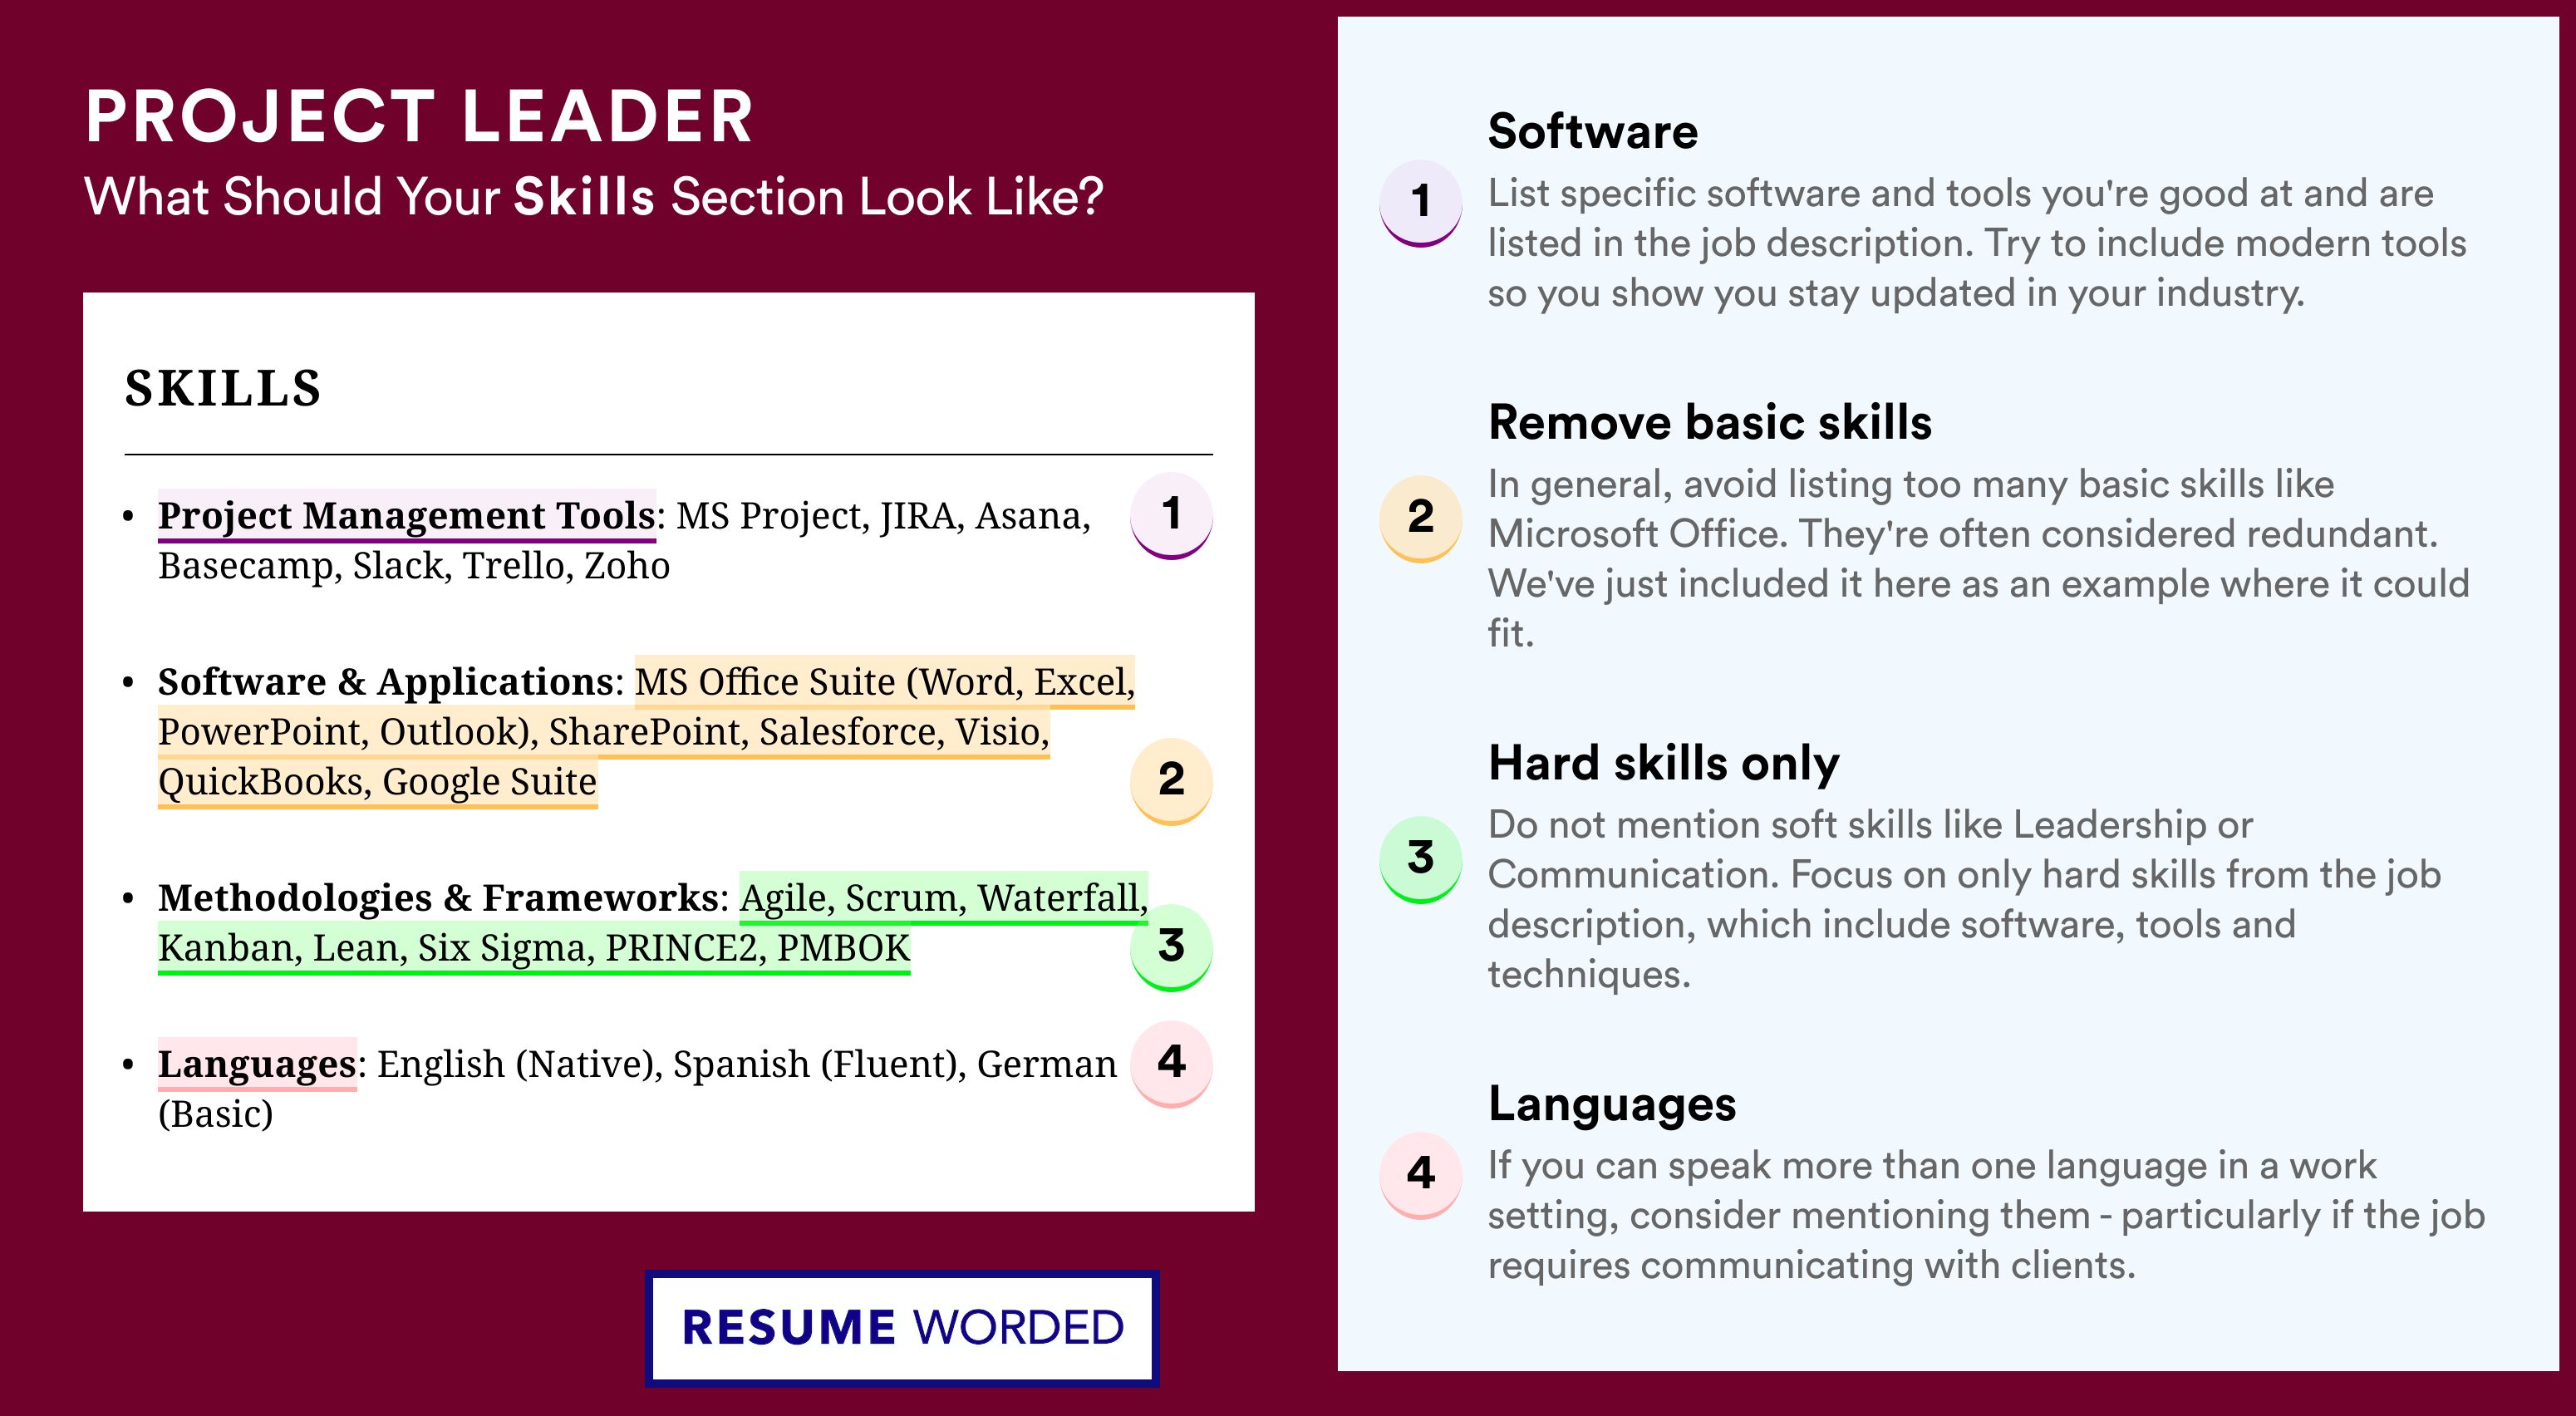 How To Write Your Skills Section - Project Leader Roles